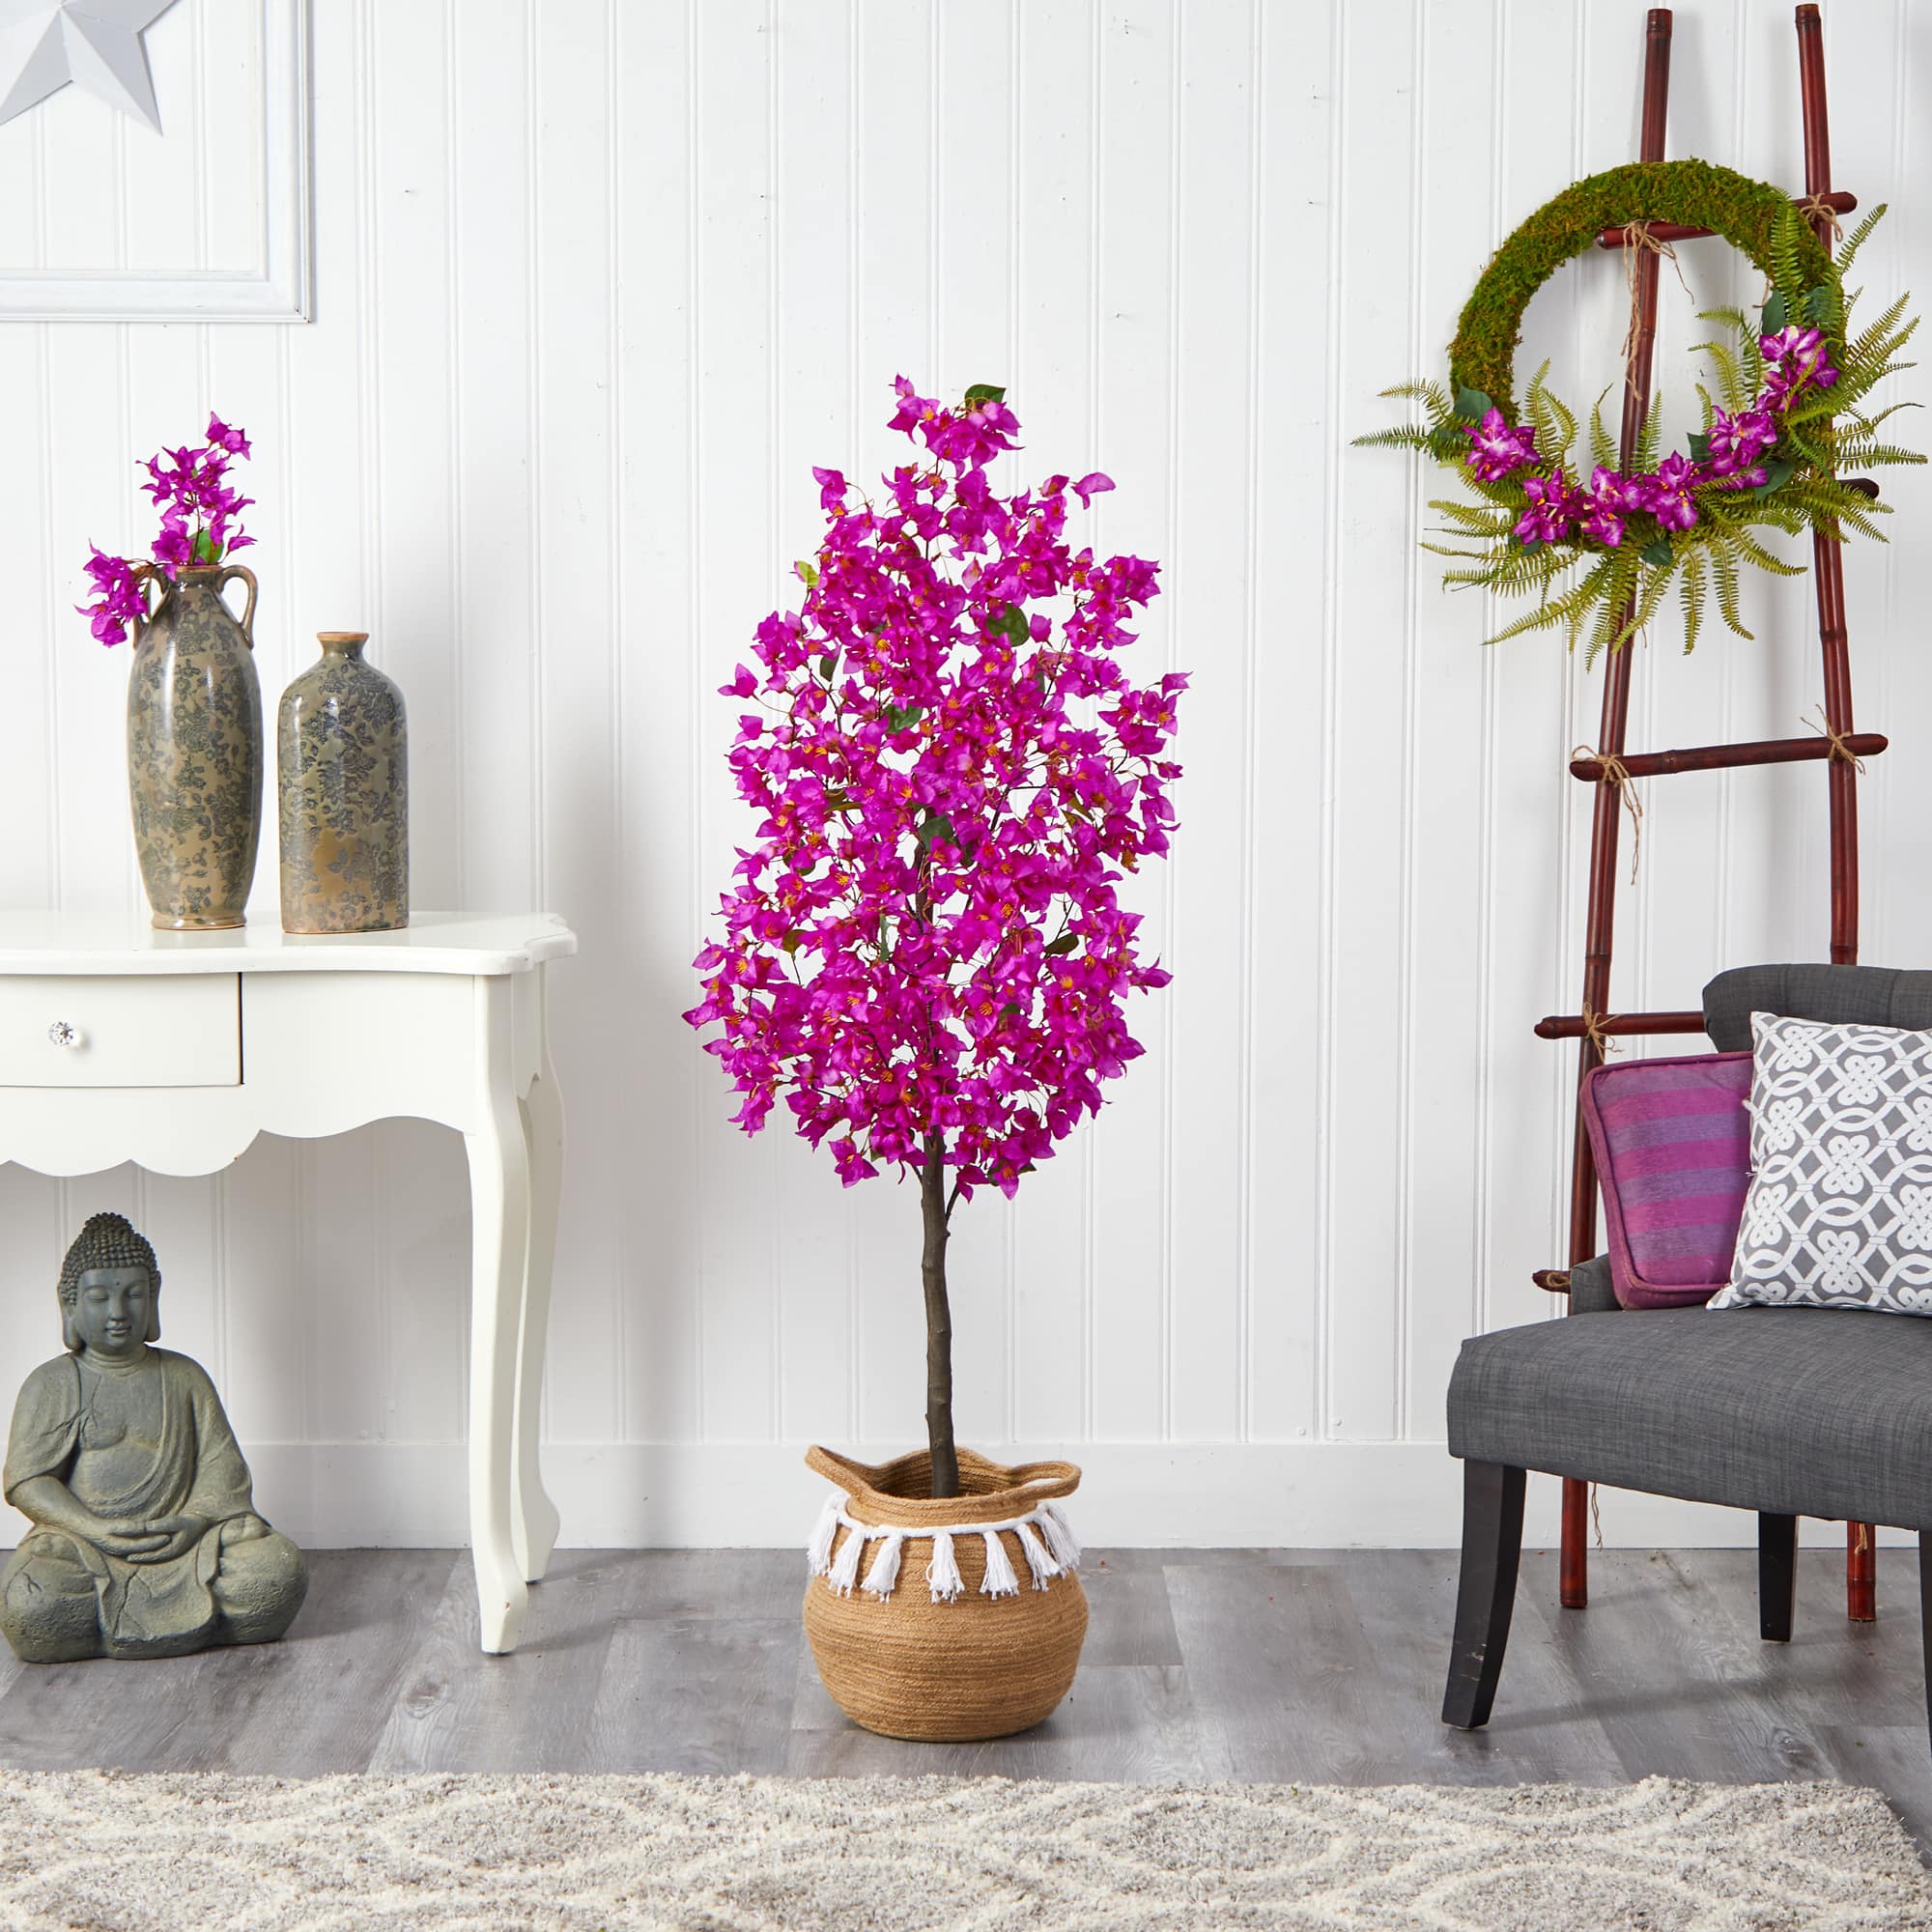 5ft. Artificial Bougainvillea Tree with Basket